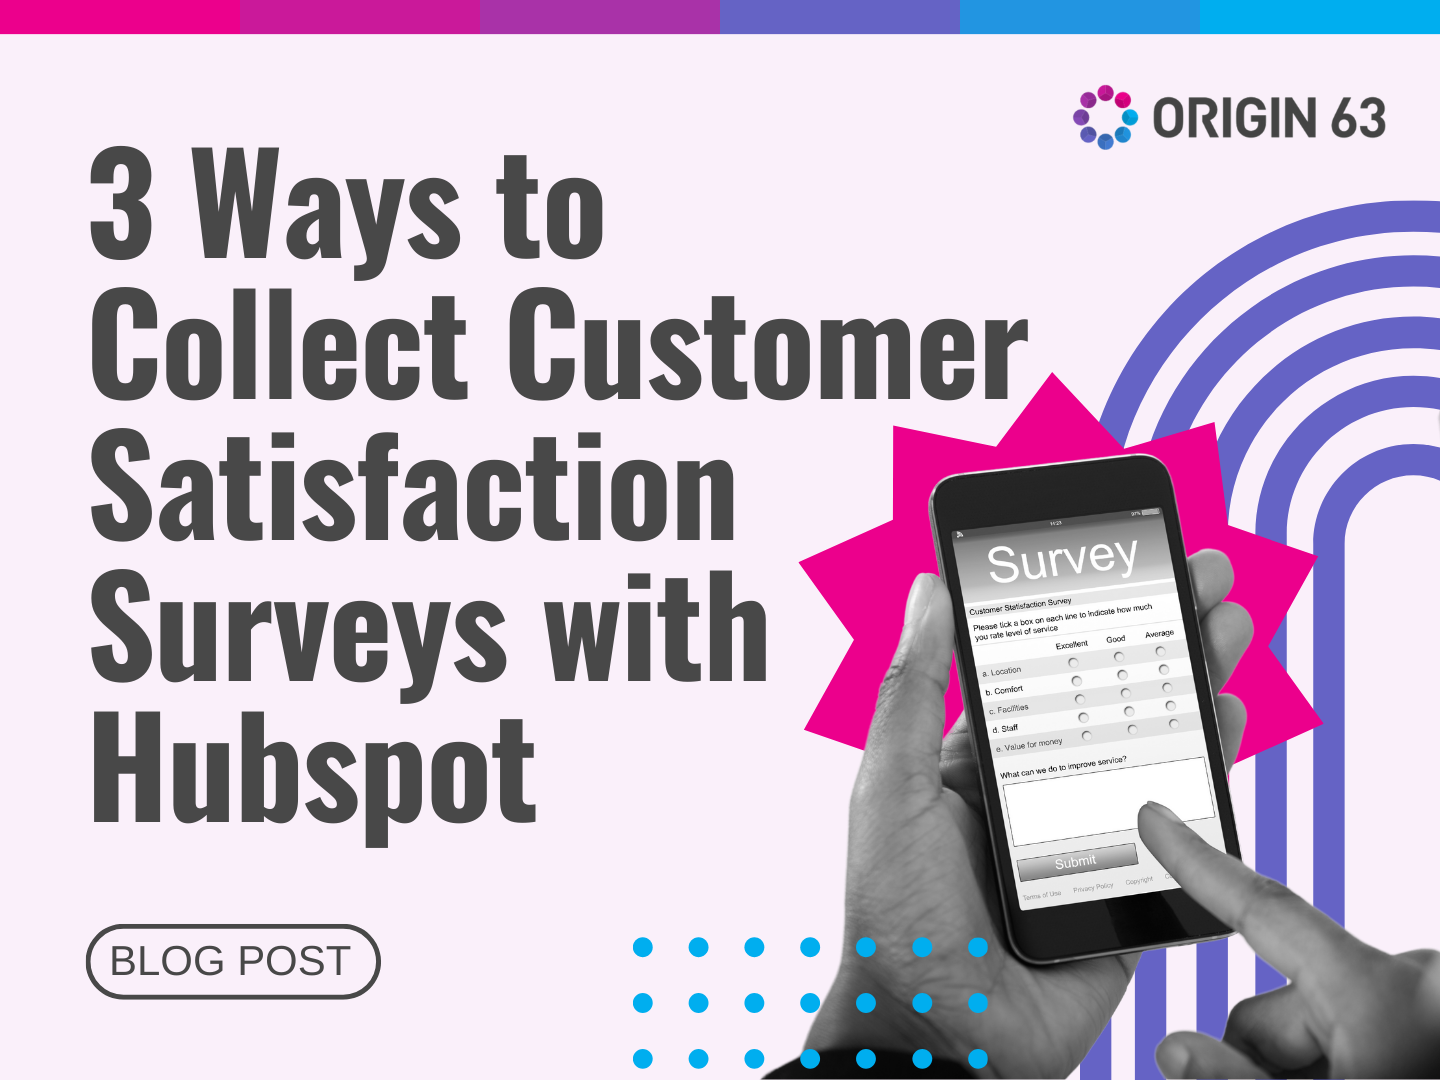 3 Ways to Collect Customer Satisfaction Surveys with Hubspot